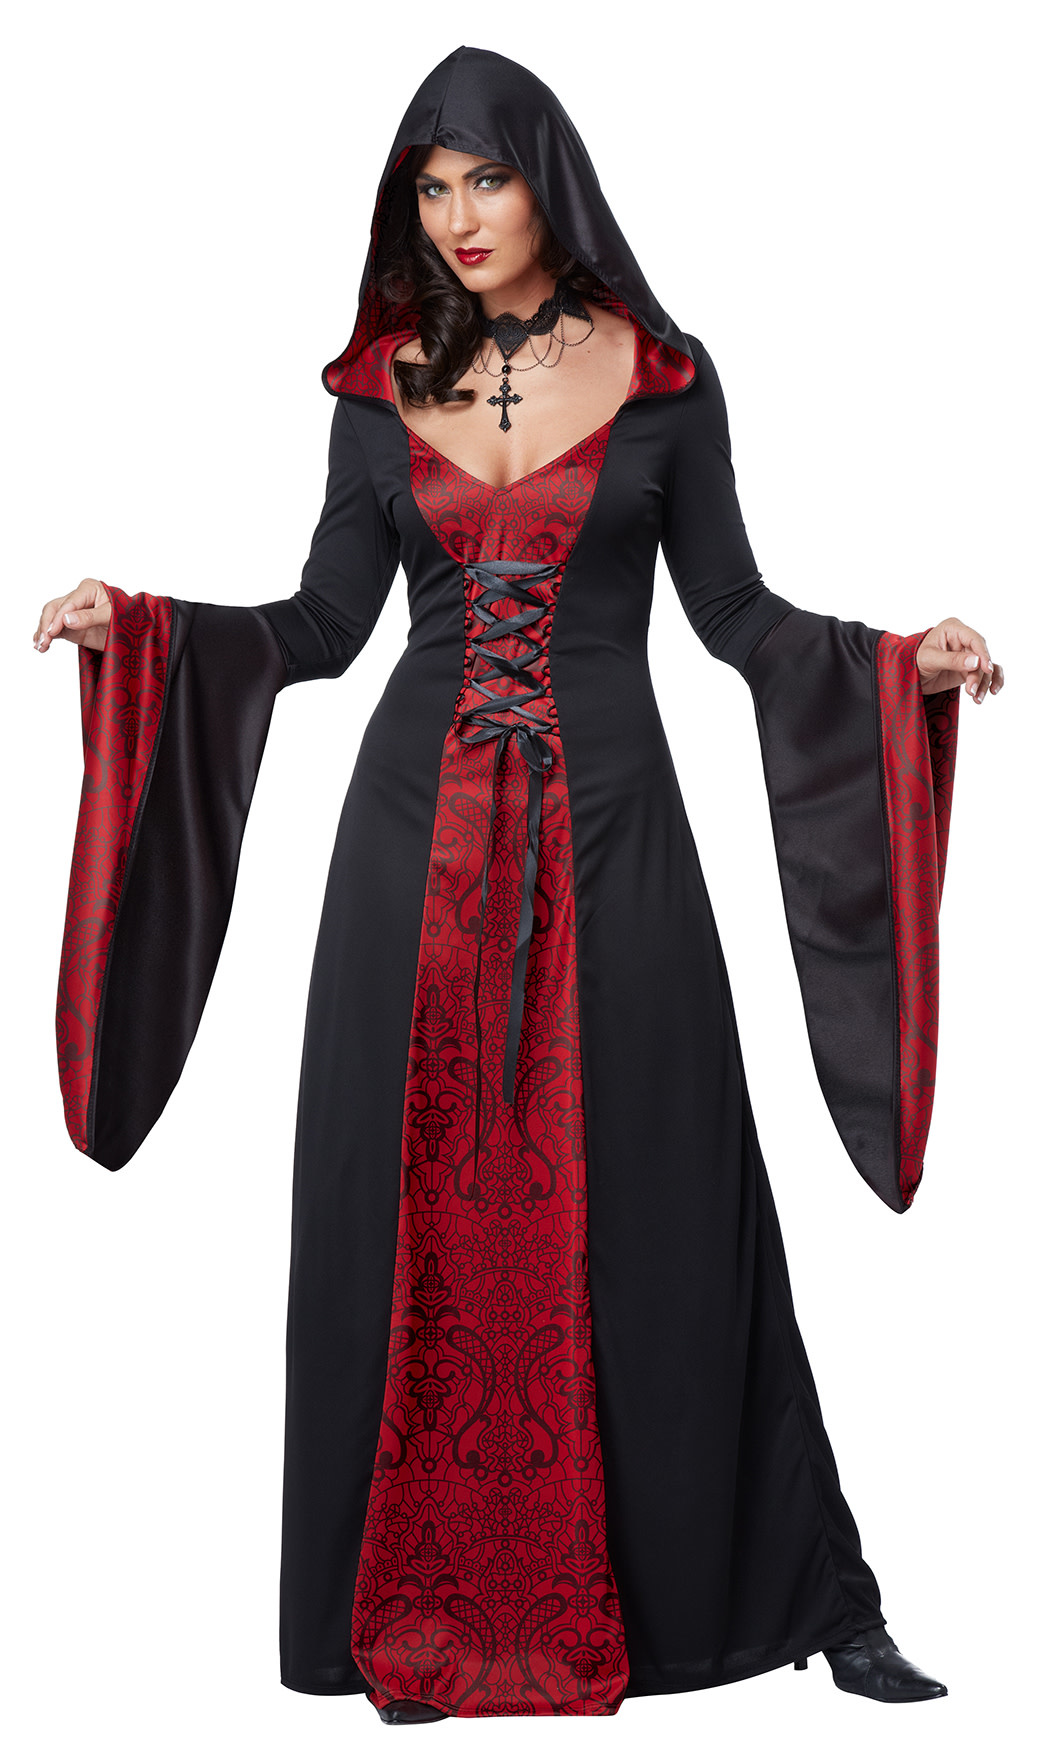 Robes - Shop Fox Robes, Stone Robes & More - Stone Cold Fox  Tagged 